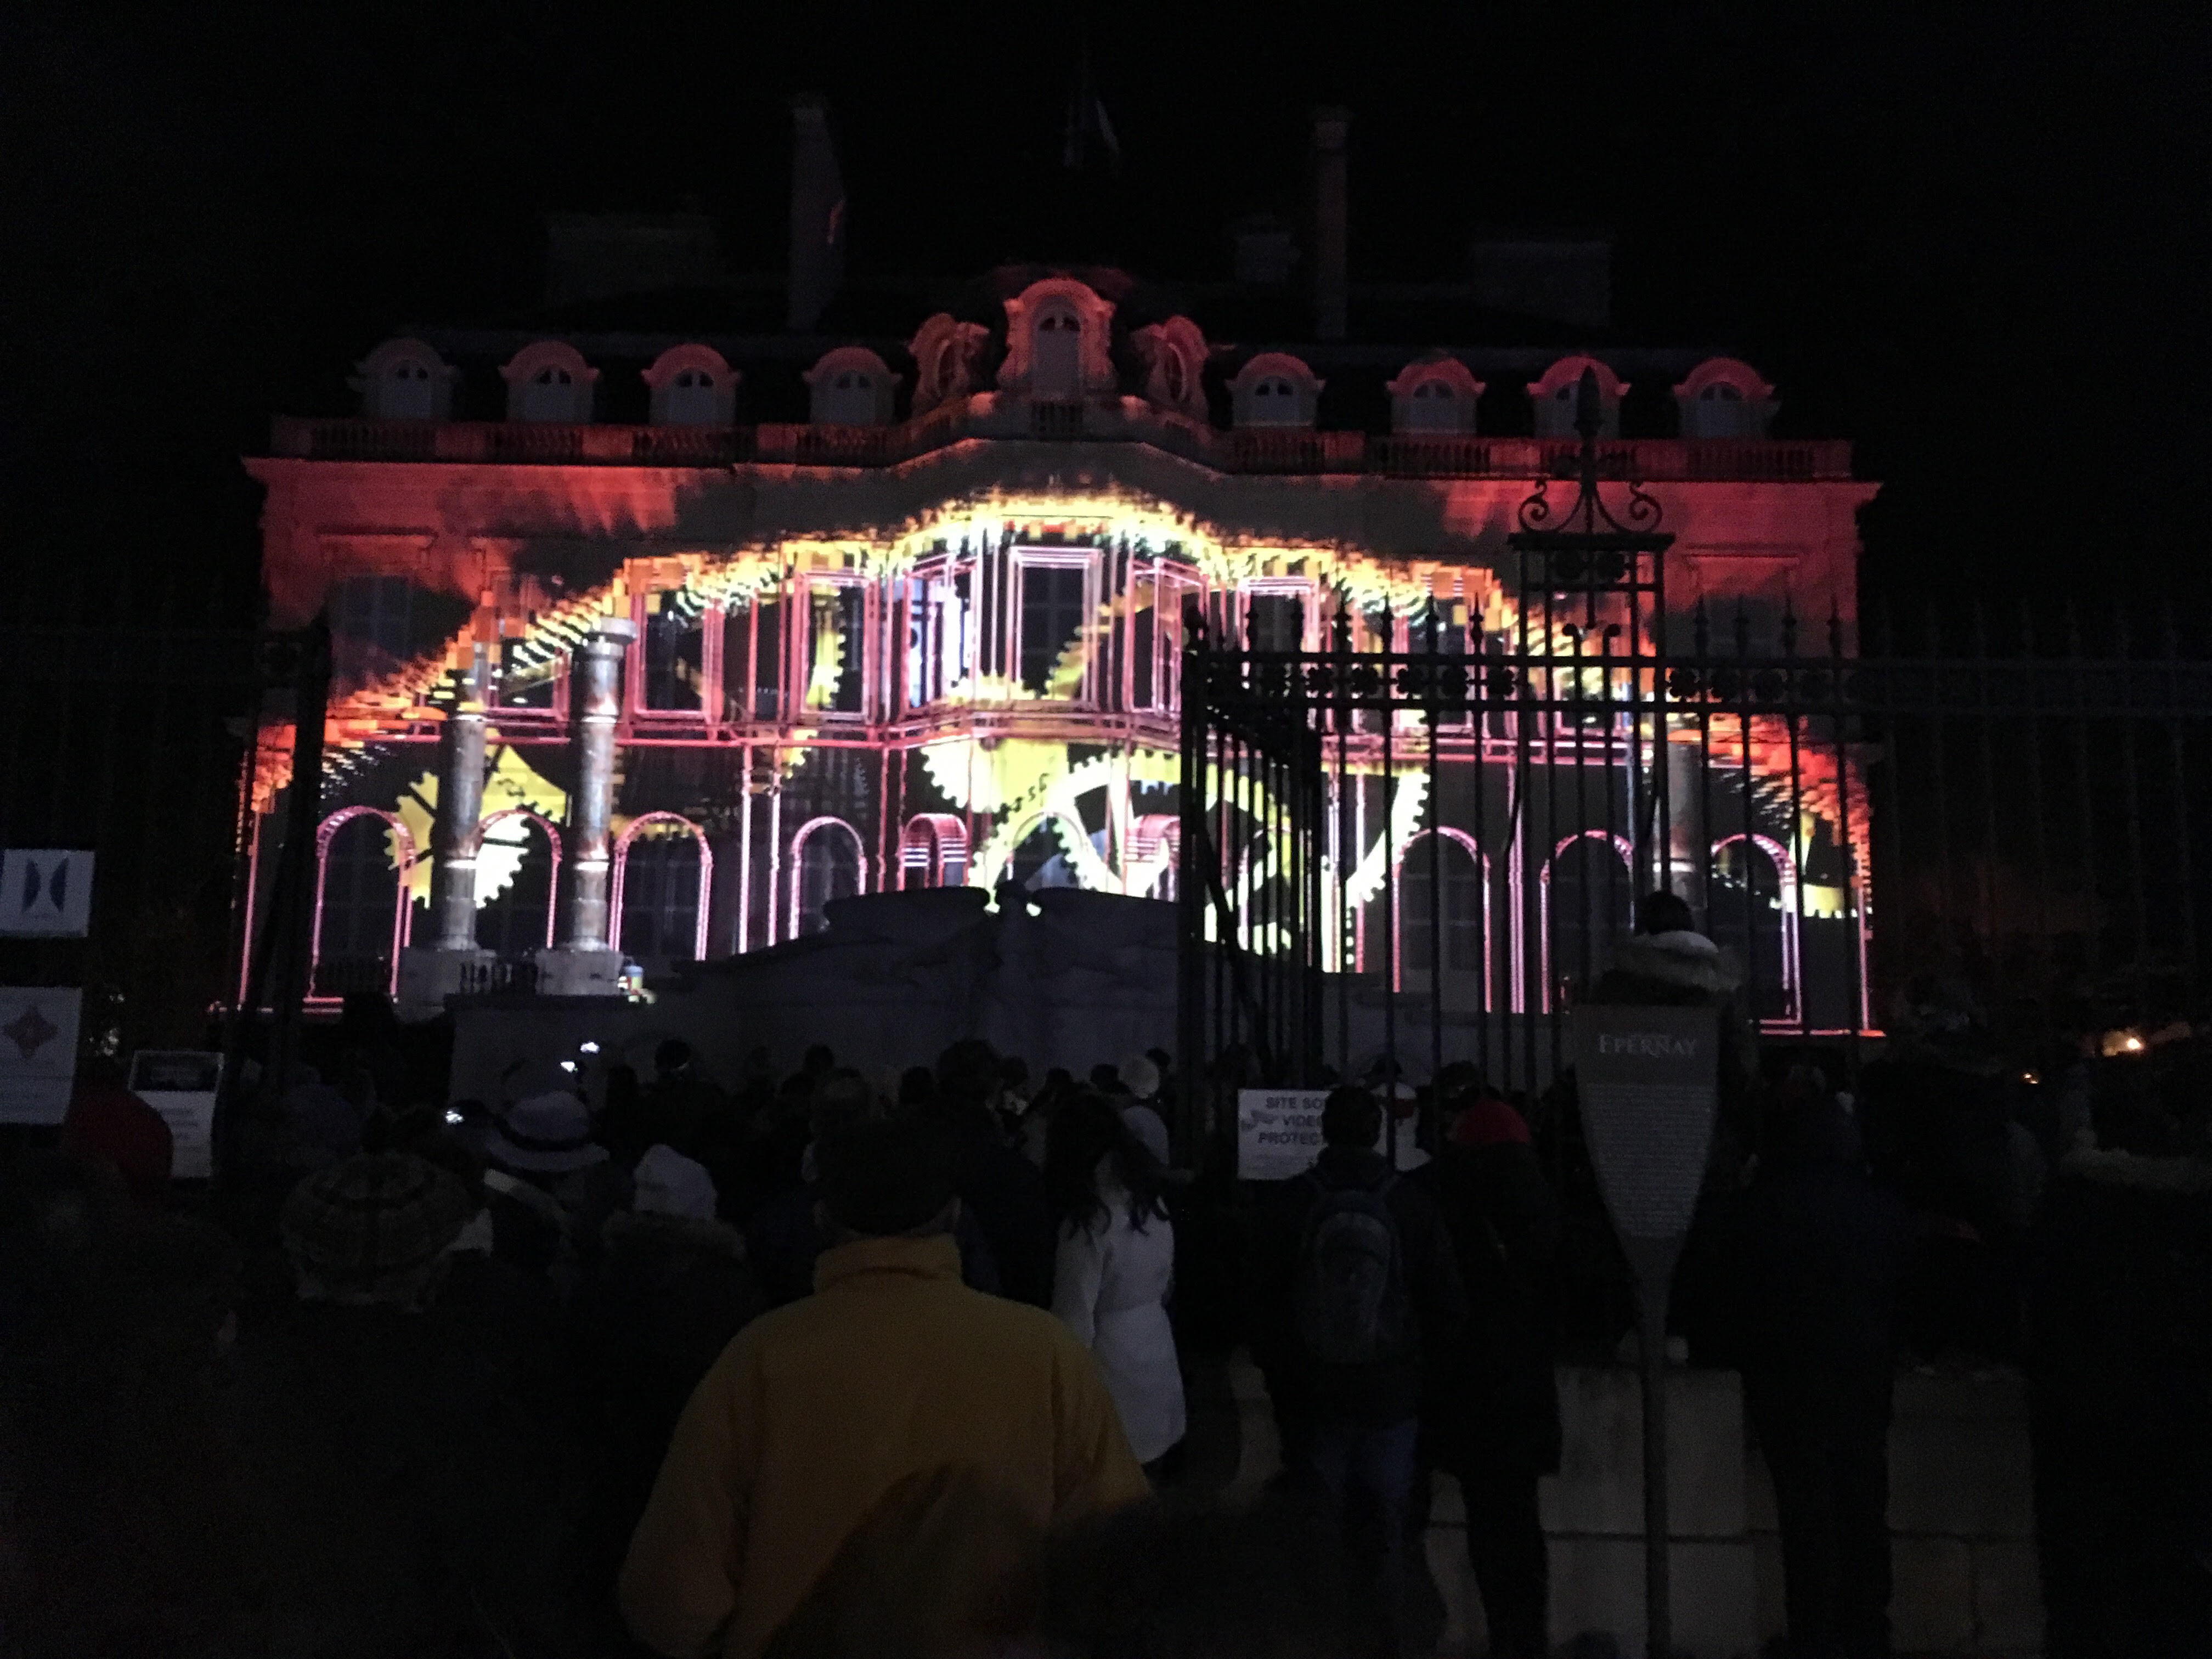 Habits de Lumière, the party of lights in Champagne